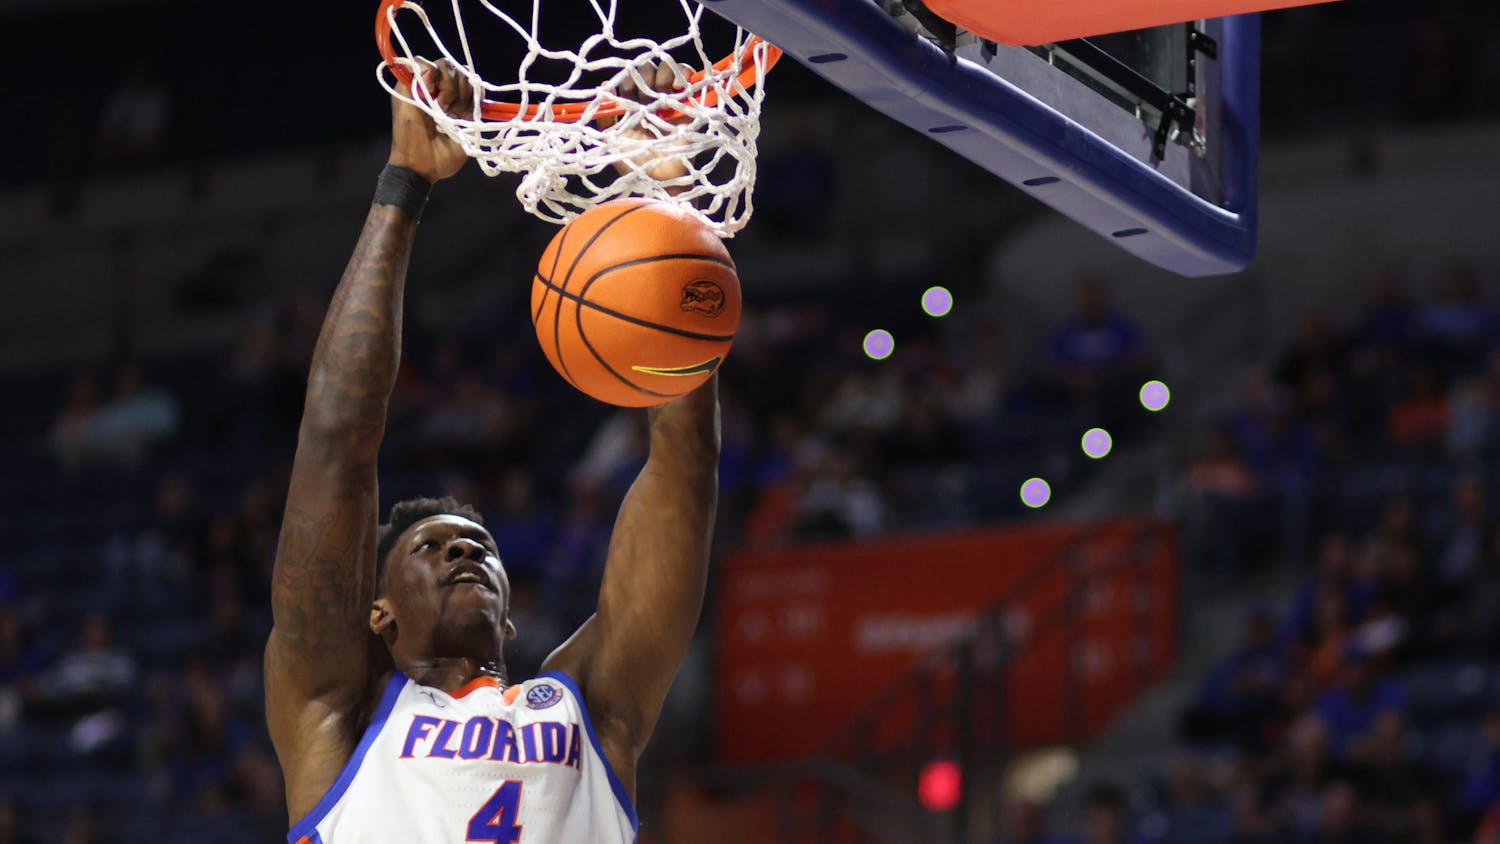 Florida graduate student forward Tyrese Samuel dunks the ball in the Gators' 77-57 home win over the Merrimack Warriors on Tuesday, Dec. 5, 2023.